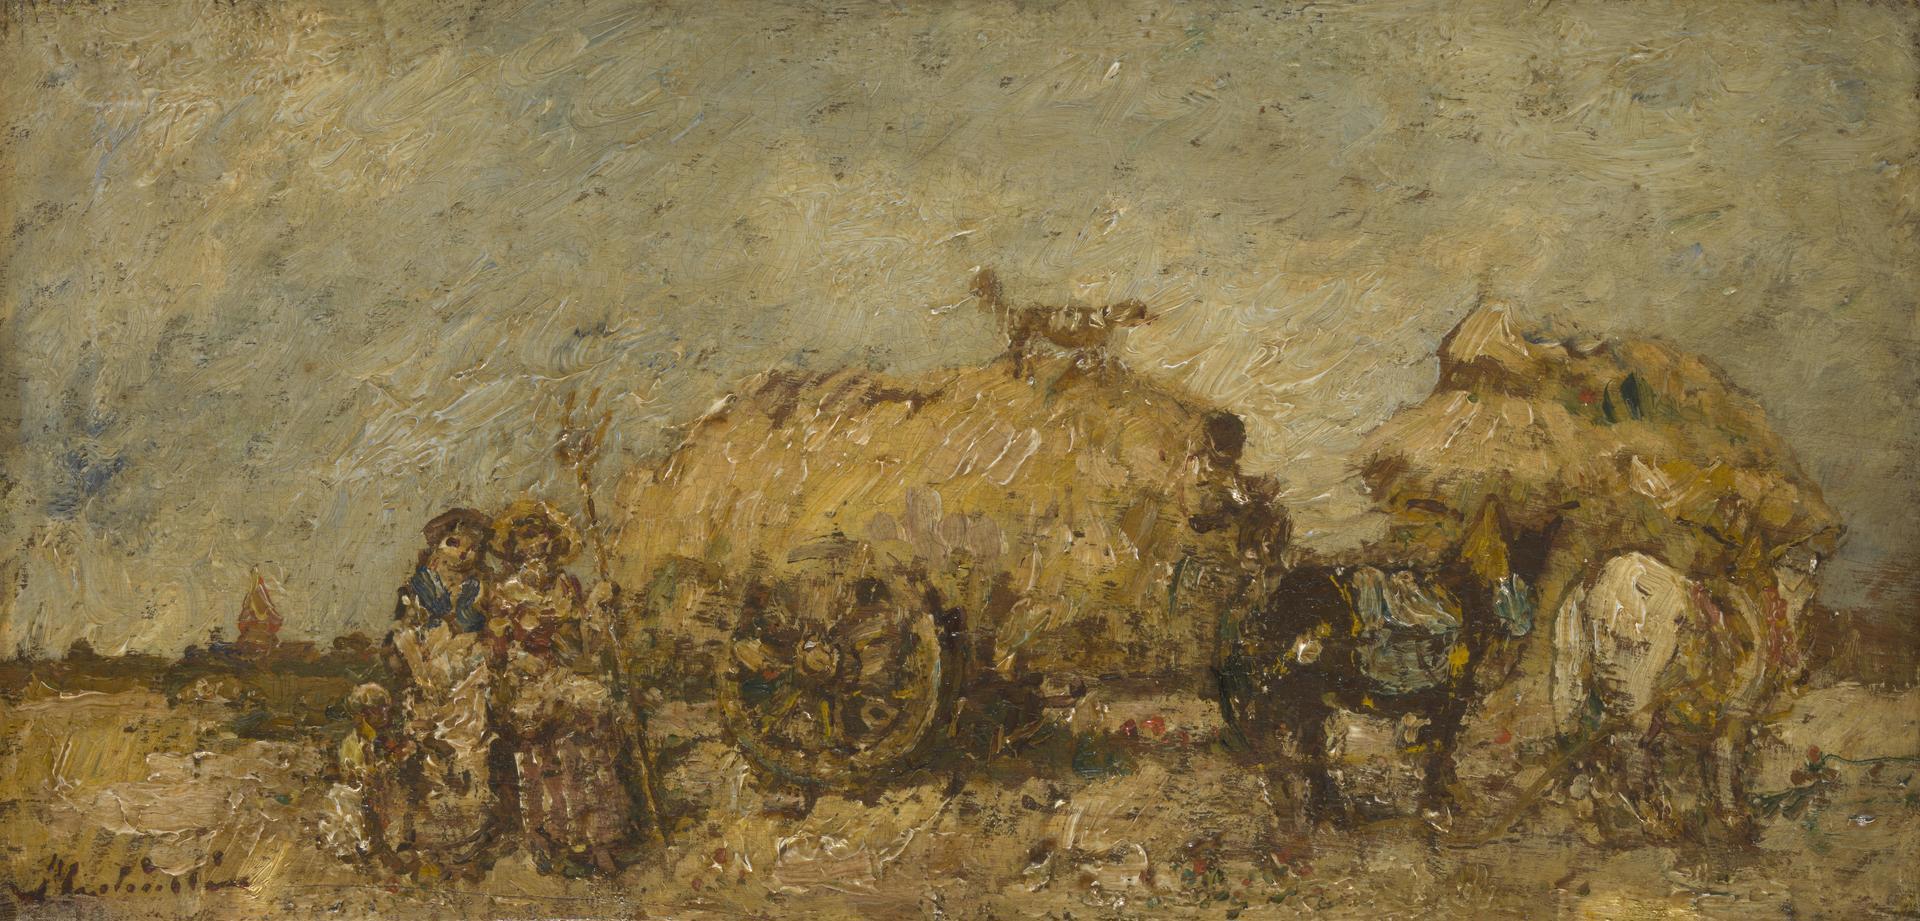 The Hayfield by Adolphe Monticelli